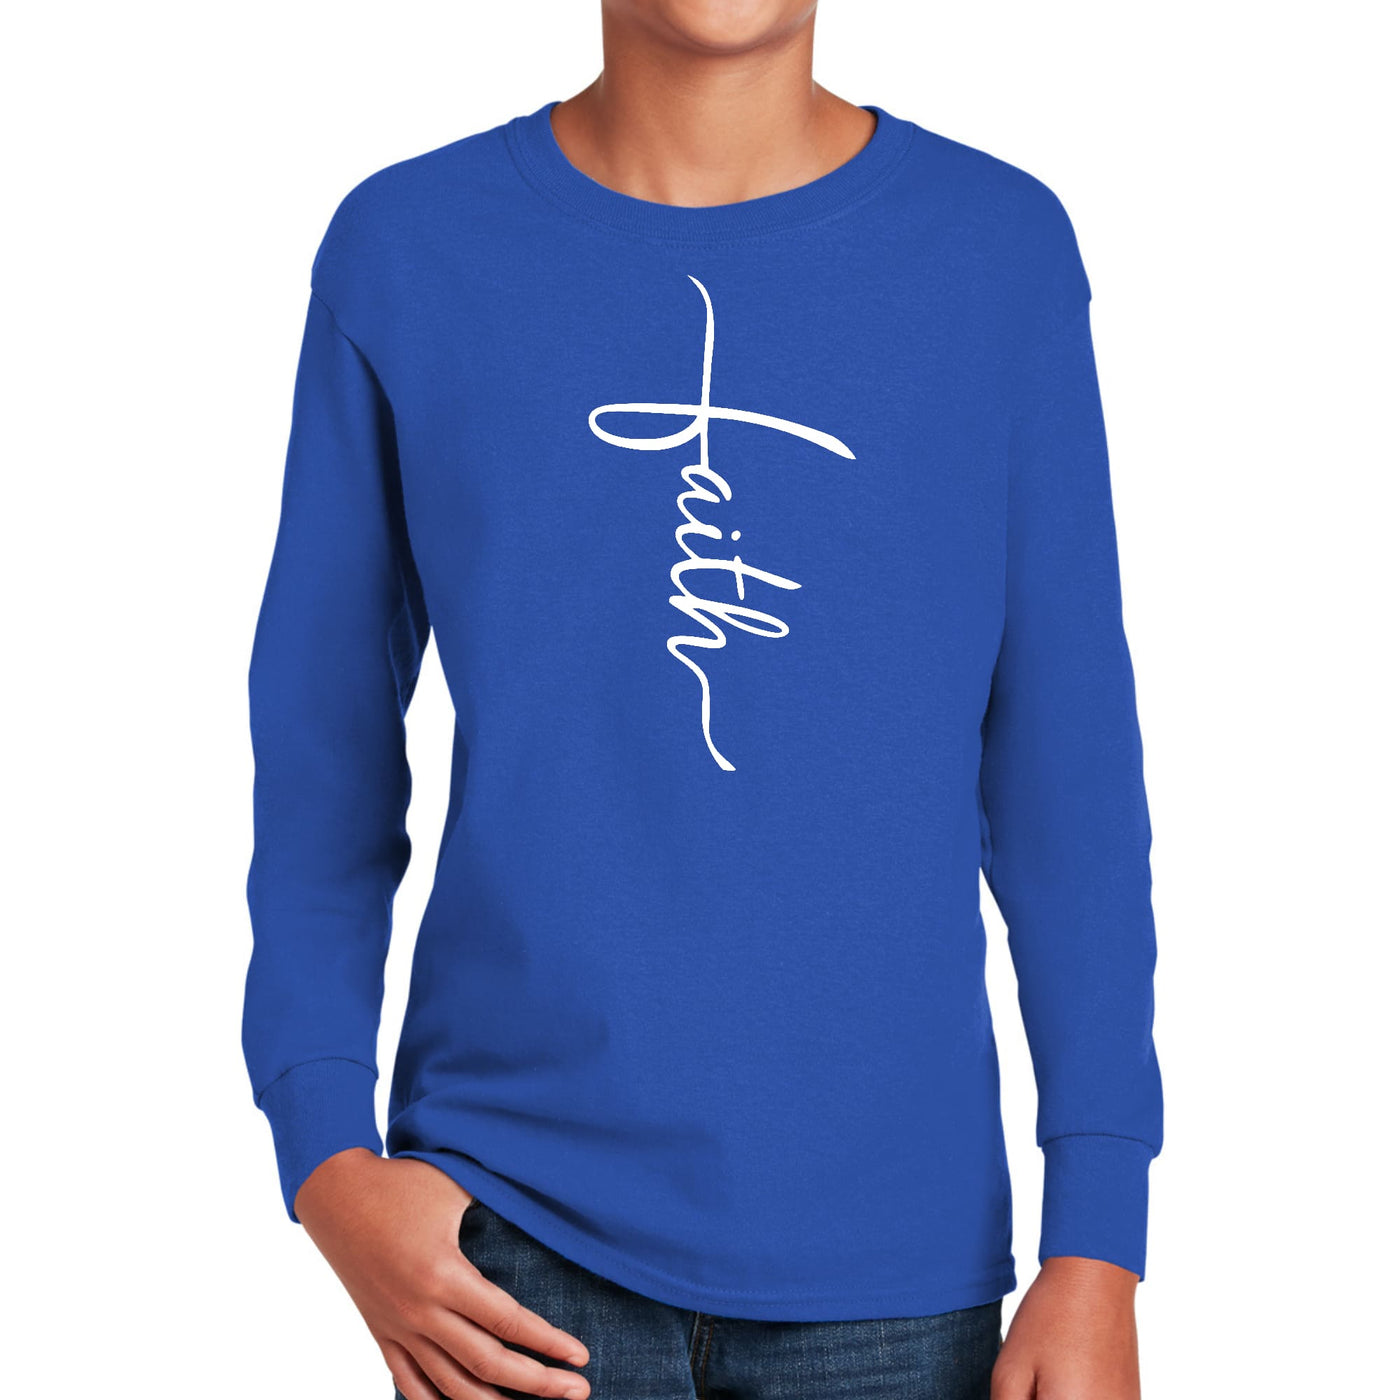 Youth Long Sleeve Graphic T-shirt Faith Script Cross Illustration - Youth